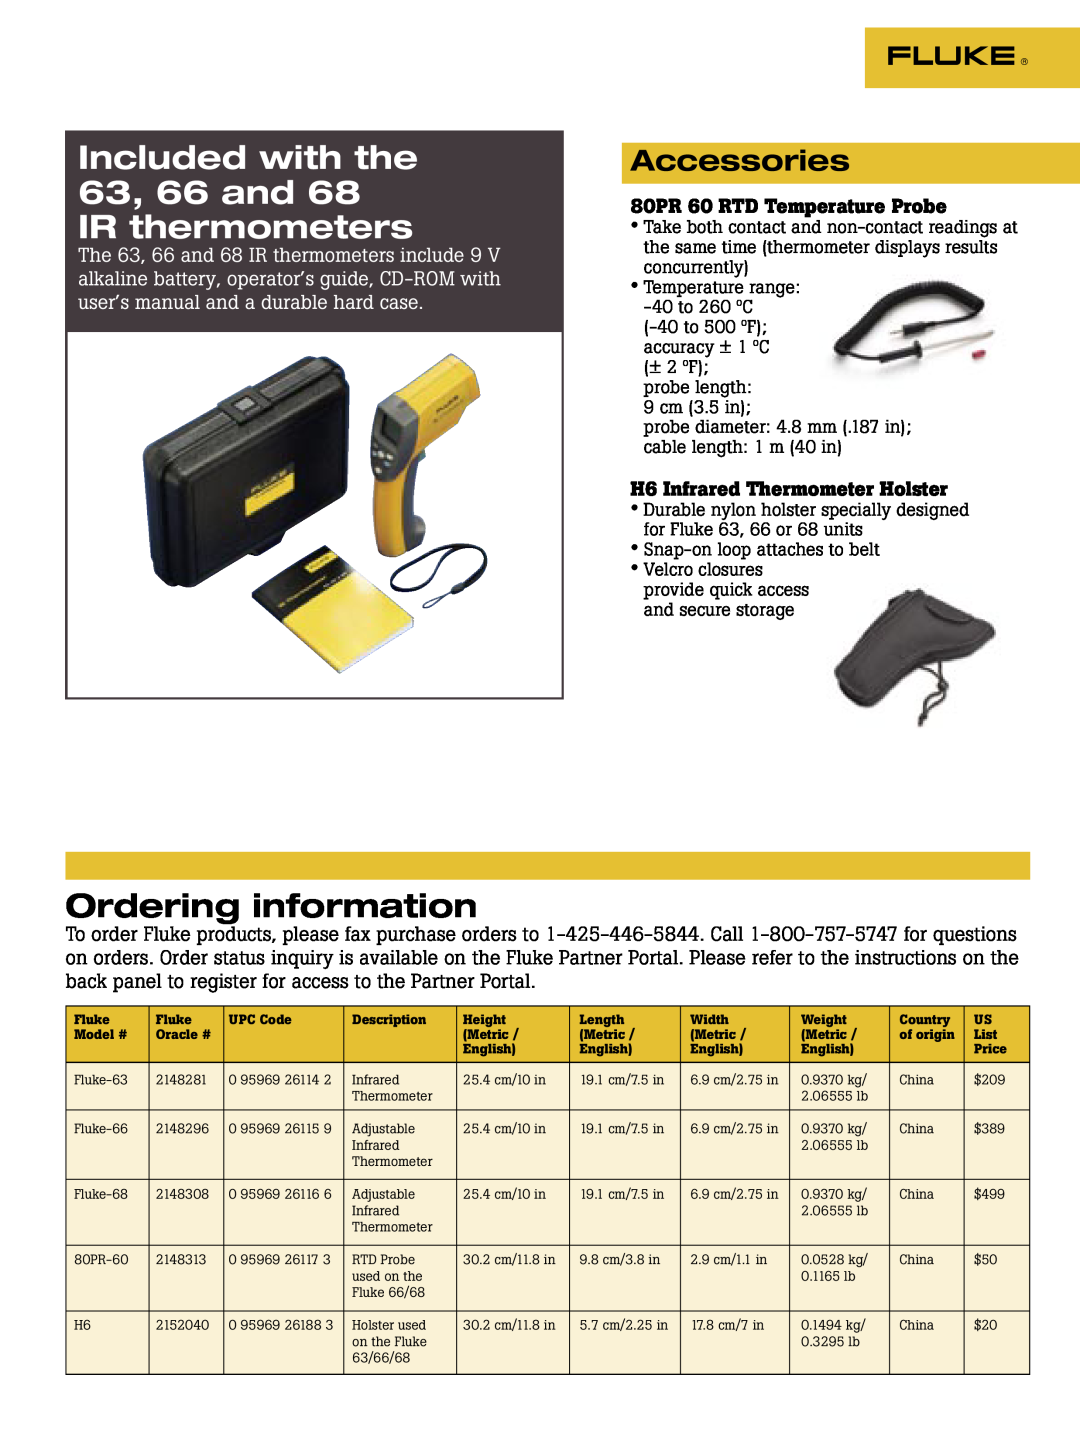 Fluke 572, 574, 576, 62 brochure Included with the 63, 66 and 68 IR thermometers, Accessories, 80PR 60 RTD Temperature Probe 